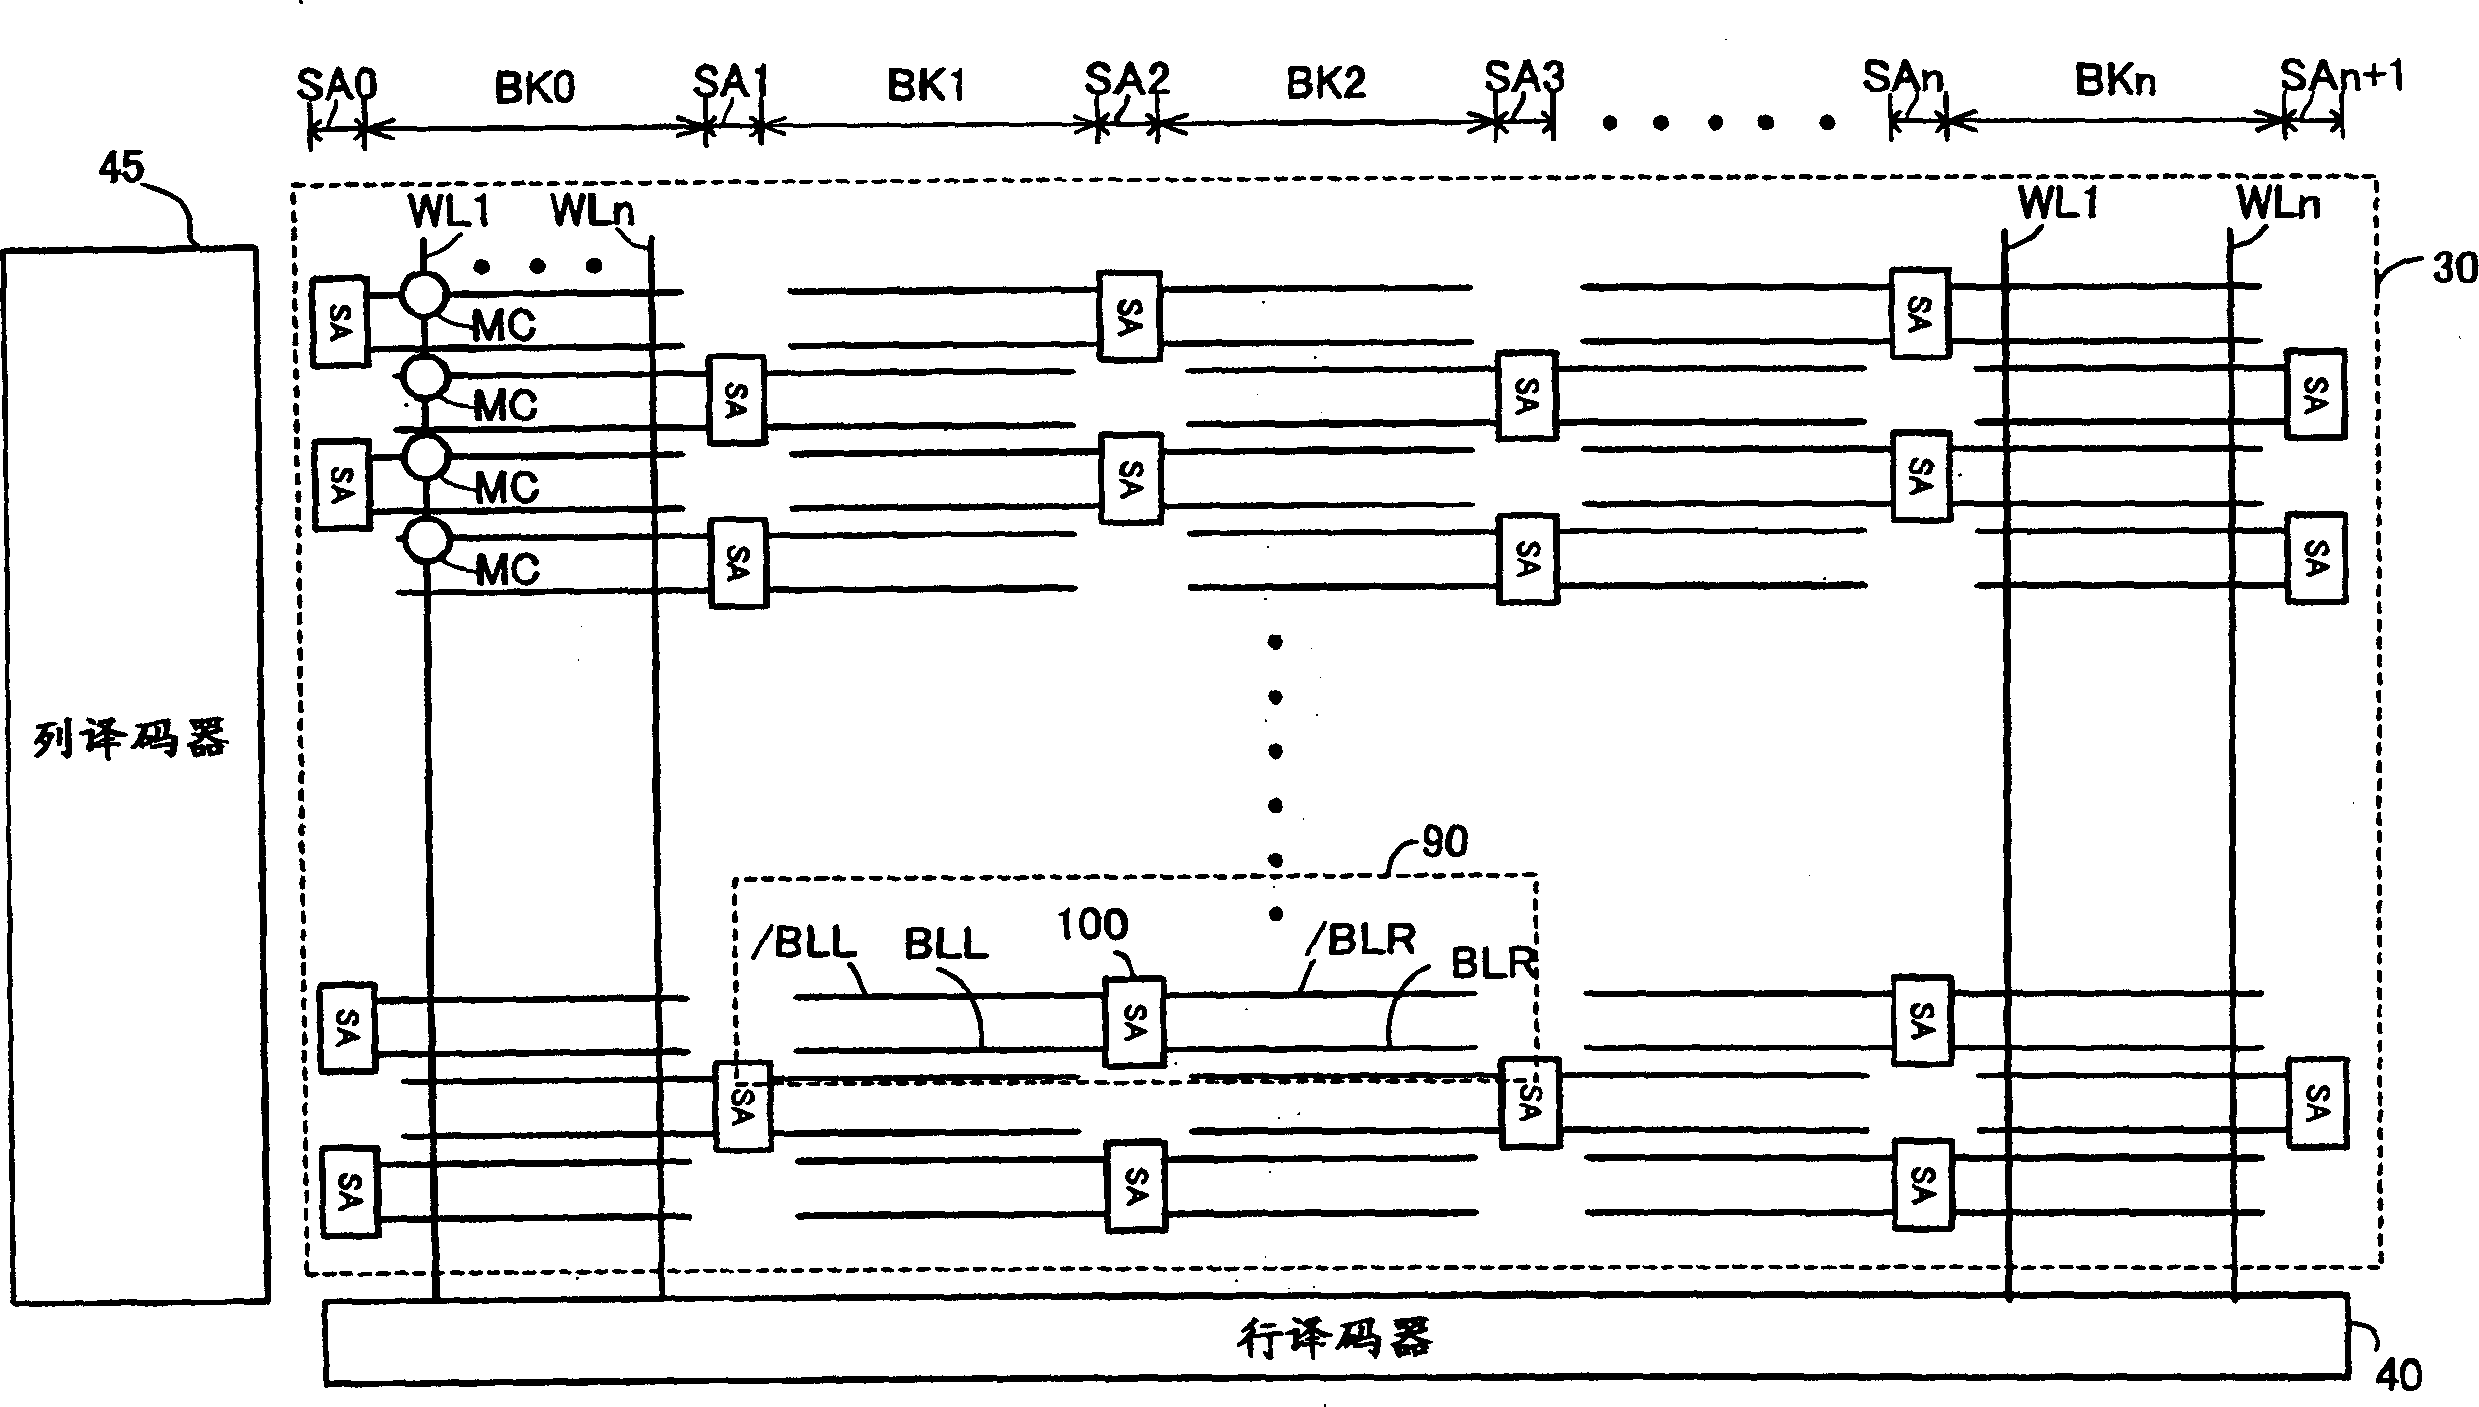 Semiconductor memory with read amplifier